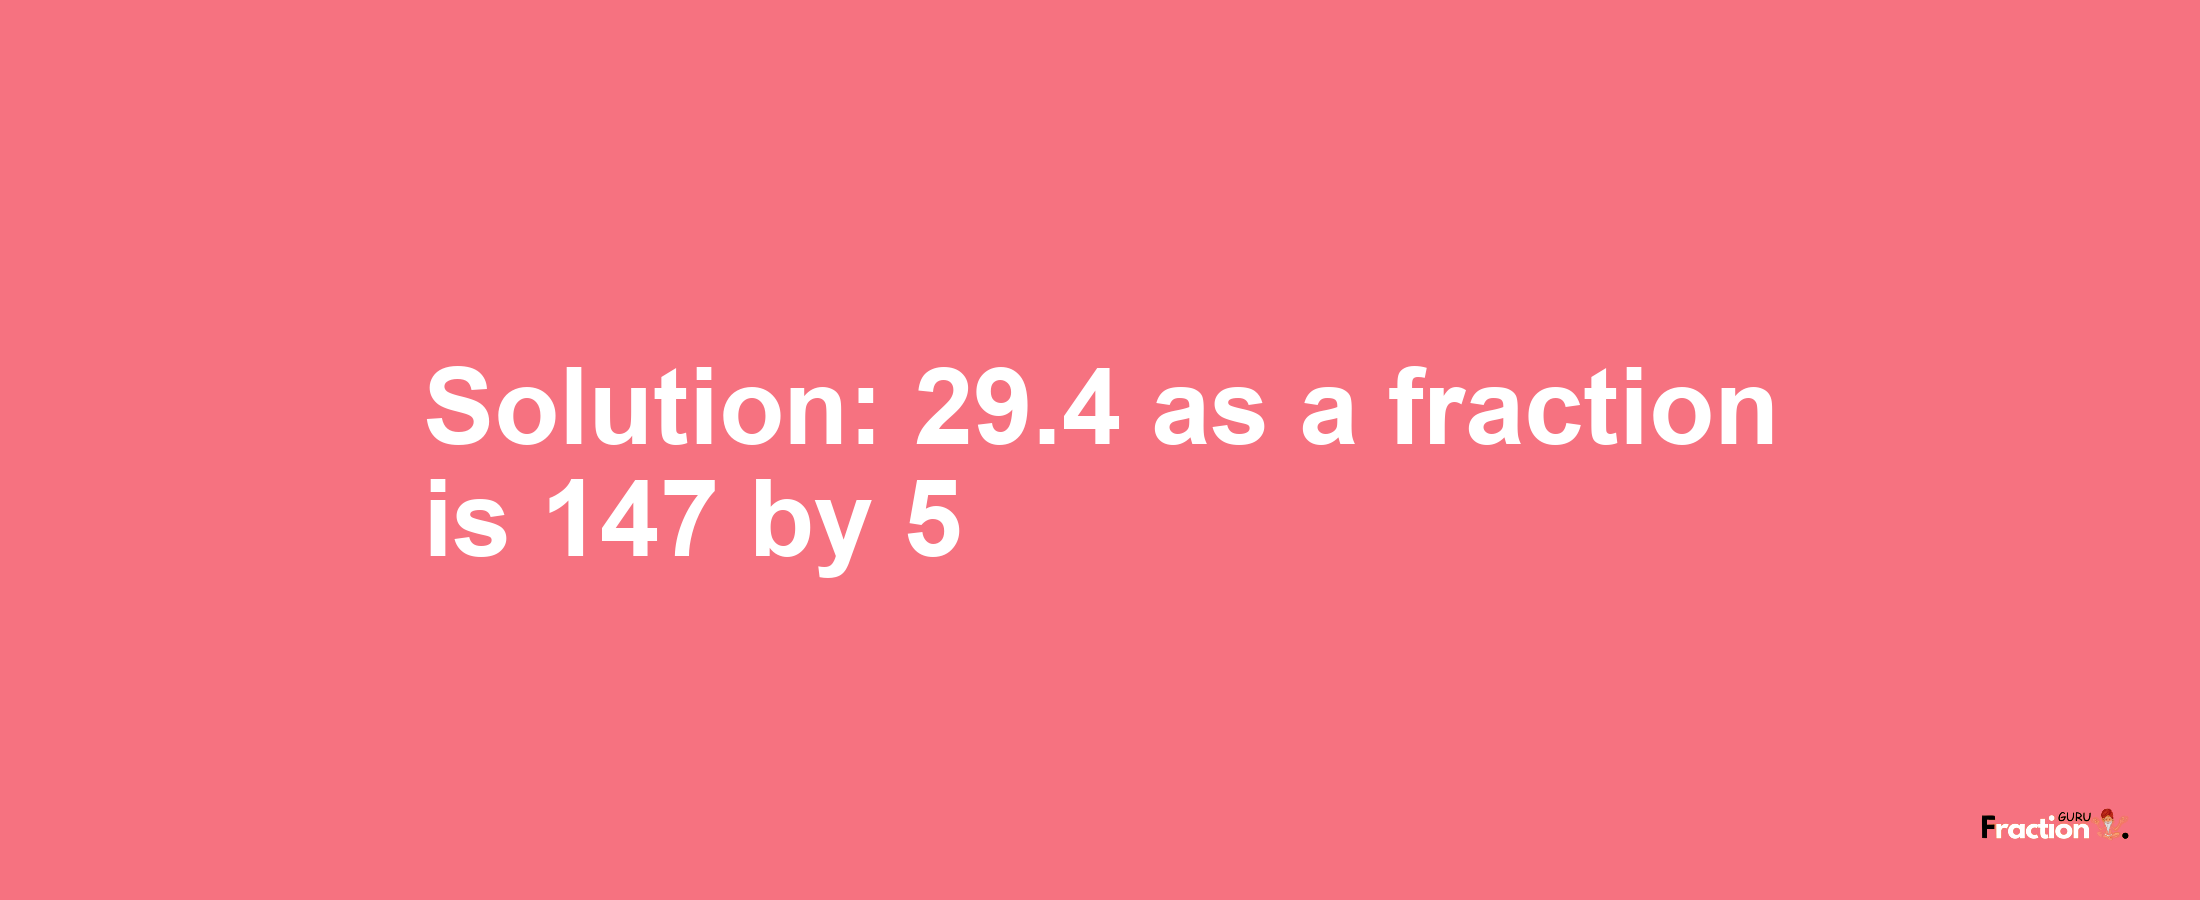 Solution:29.4 as a fraction is 147/5